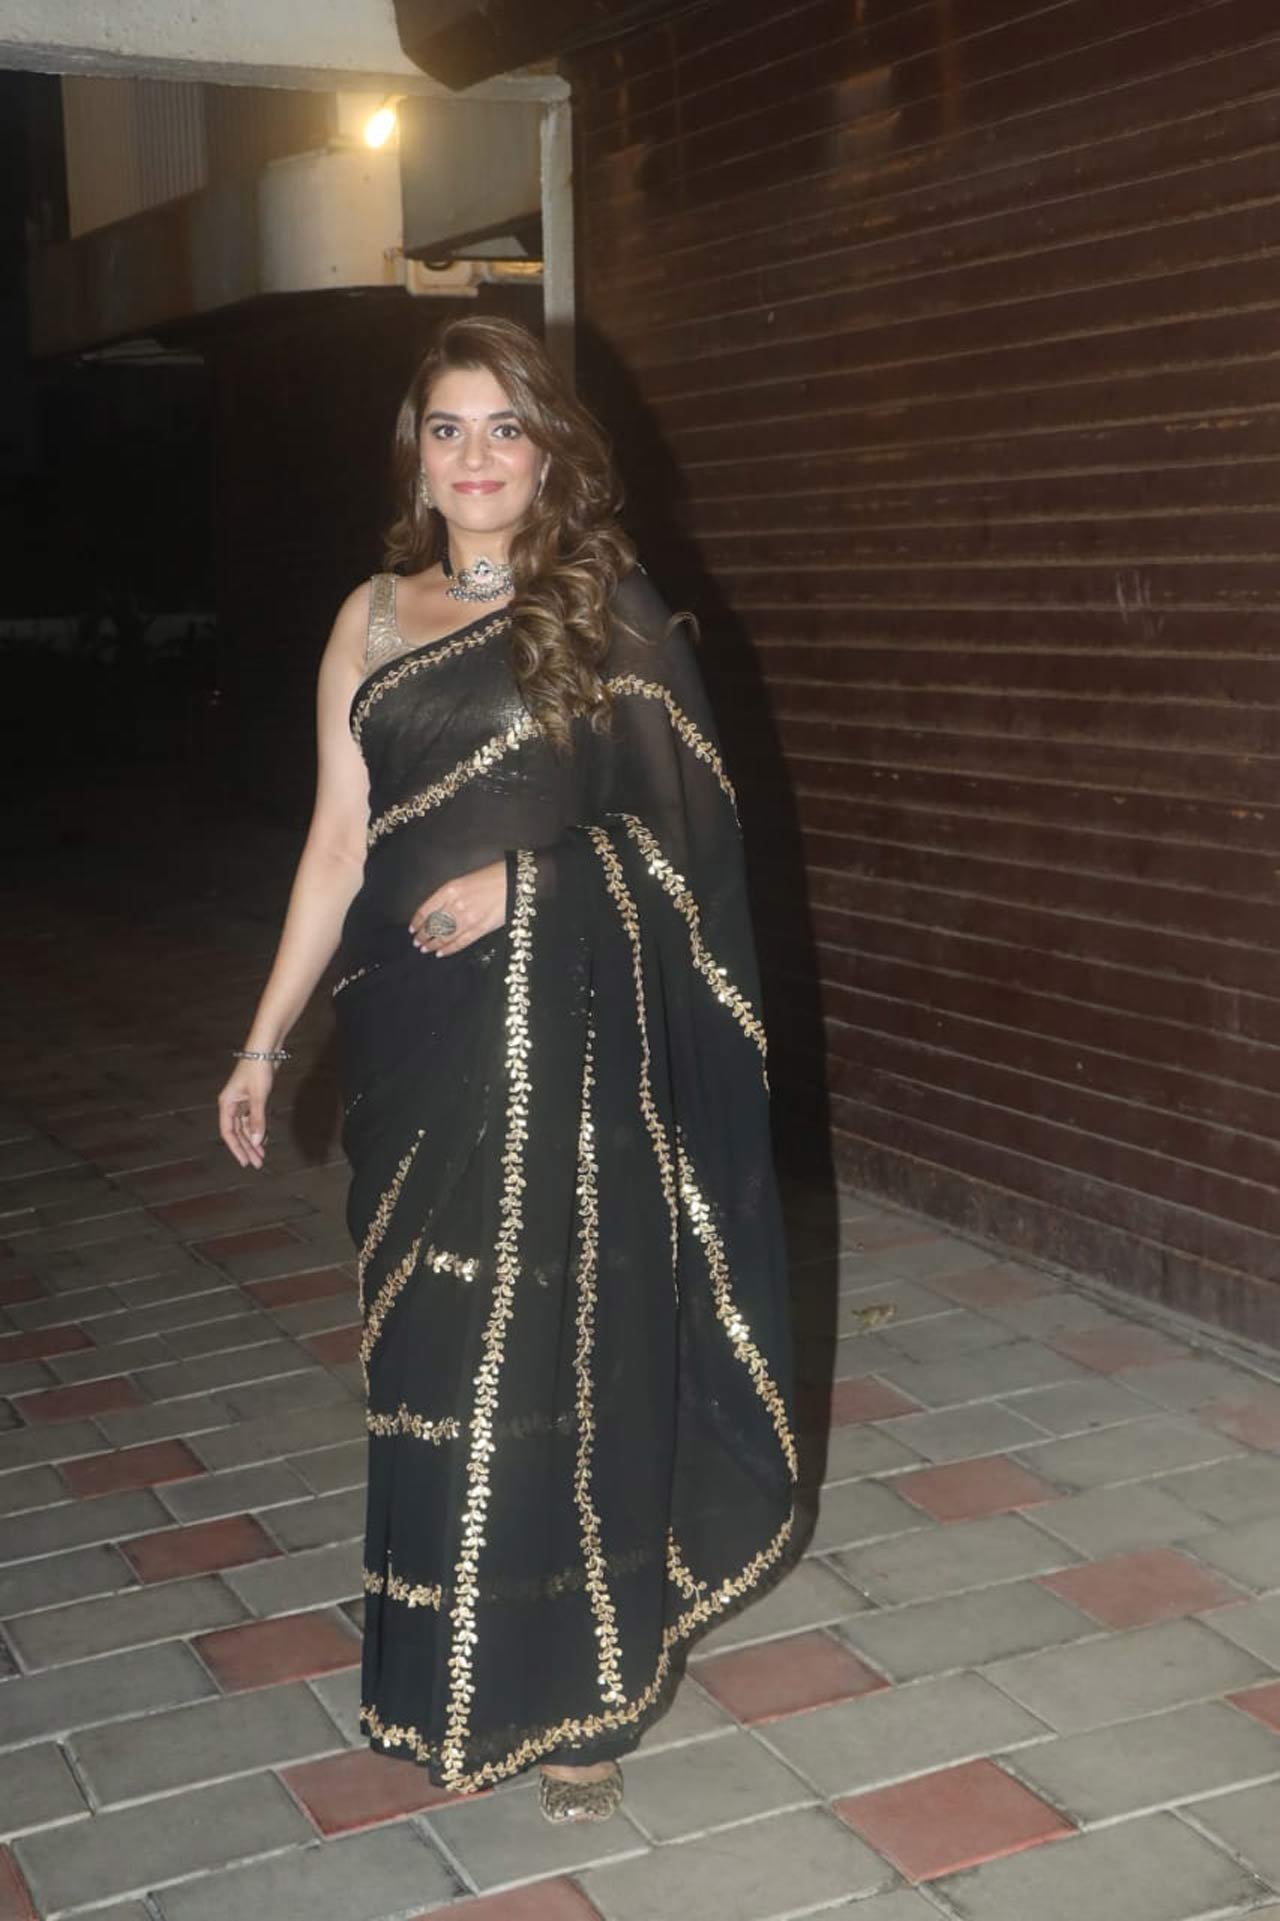 Pooja Gor's sartorial choice was appreciated by many fashionistas. She draped a black and golden six-yard as she attended popular producer and director Sandiip Sickand's Diwali bash.